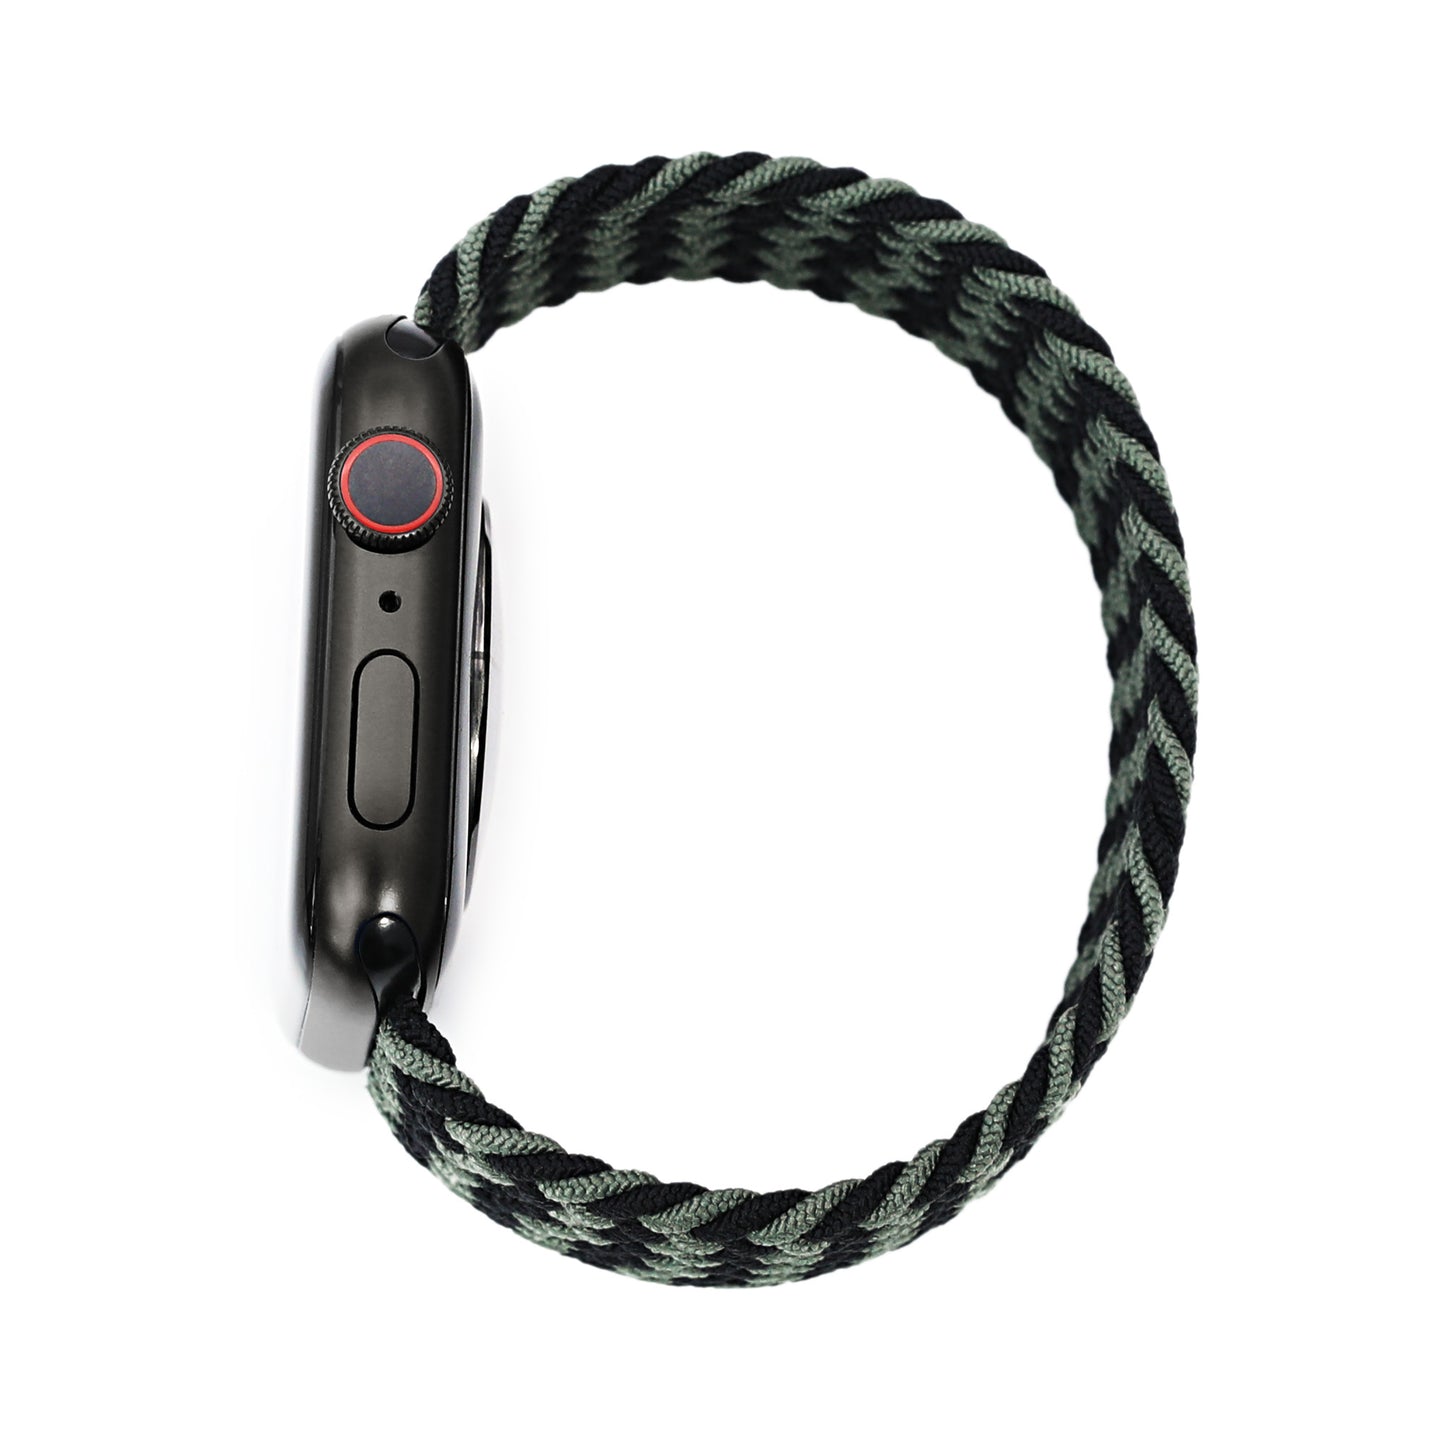 Stretchable Black-Green Solo Loop Braided compatible with Apple Watch 44mm / 42mm models